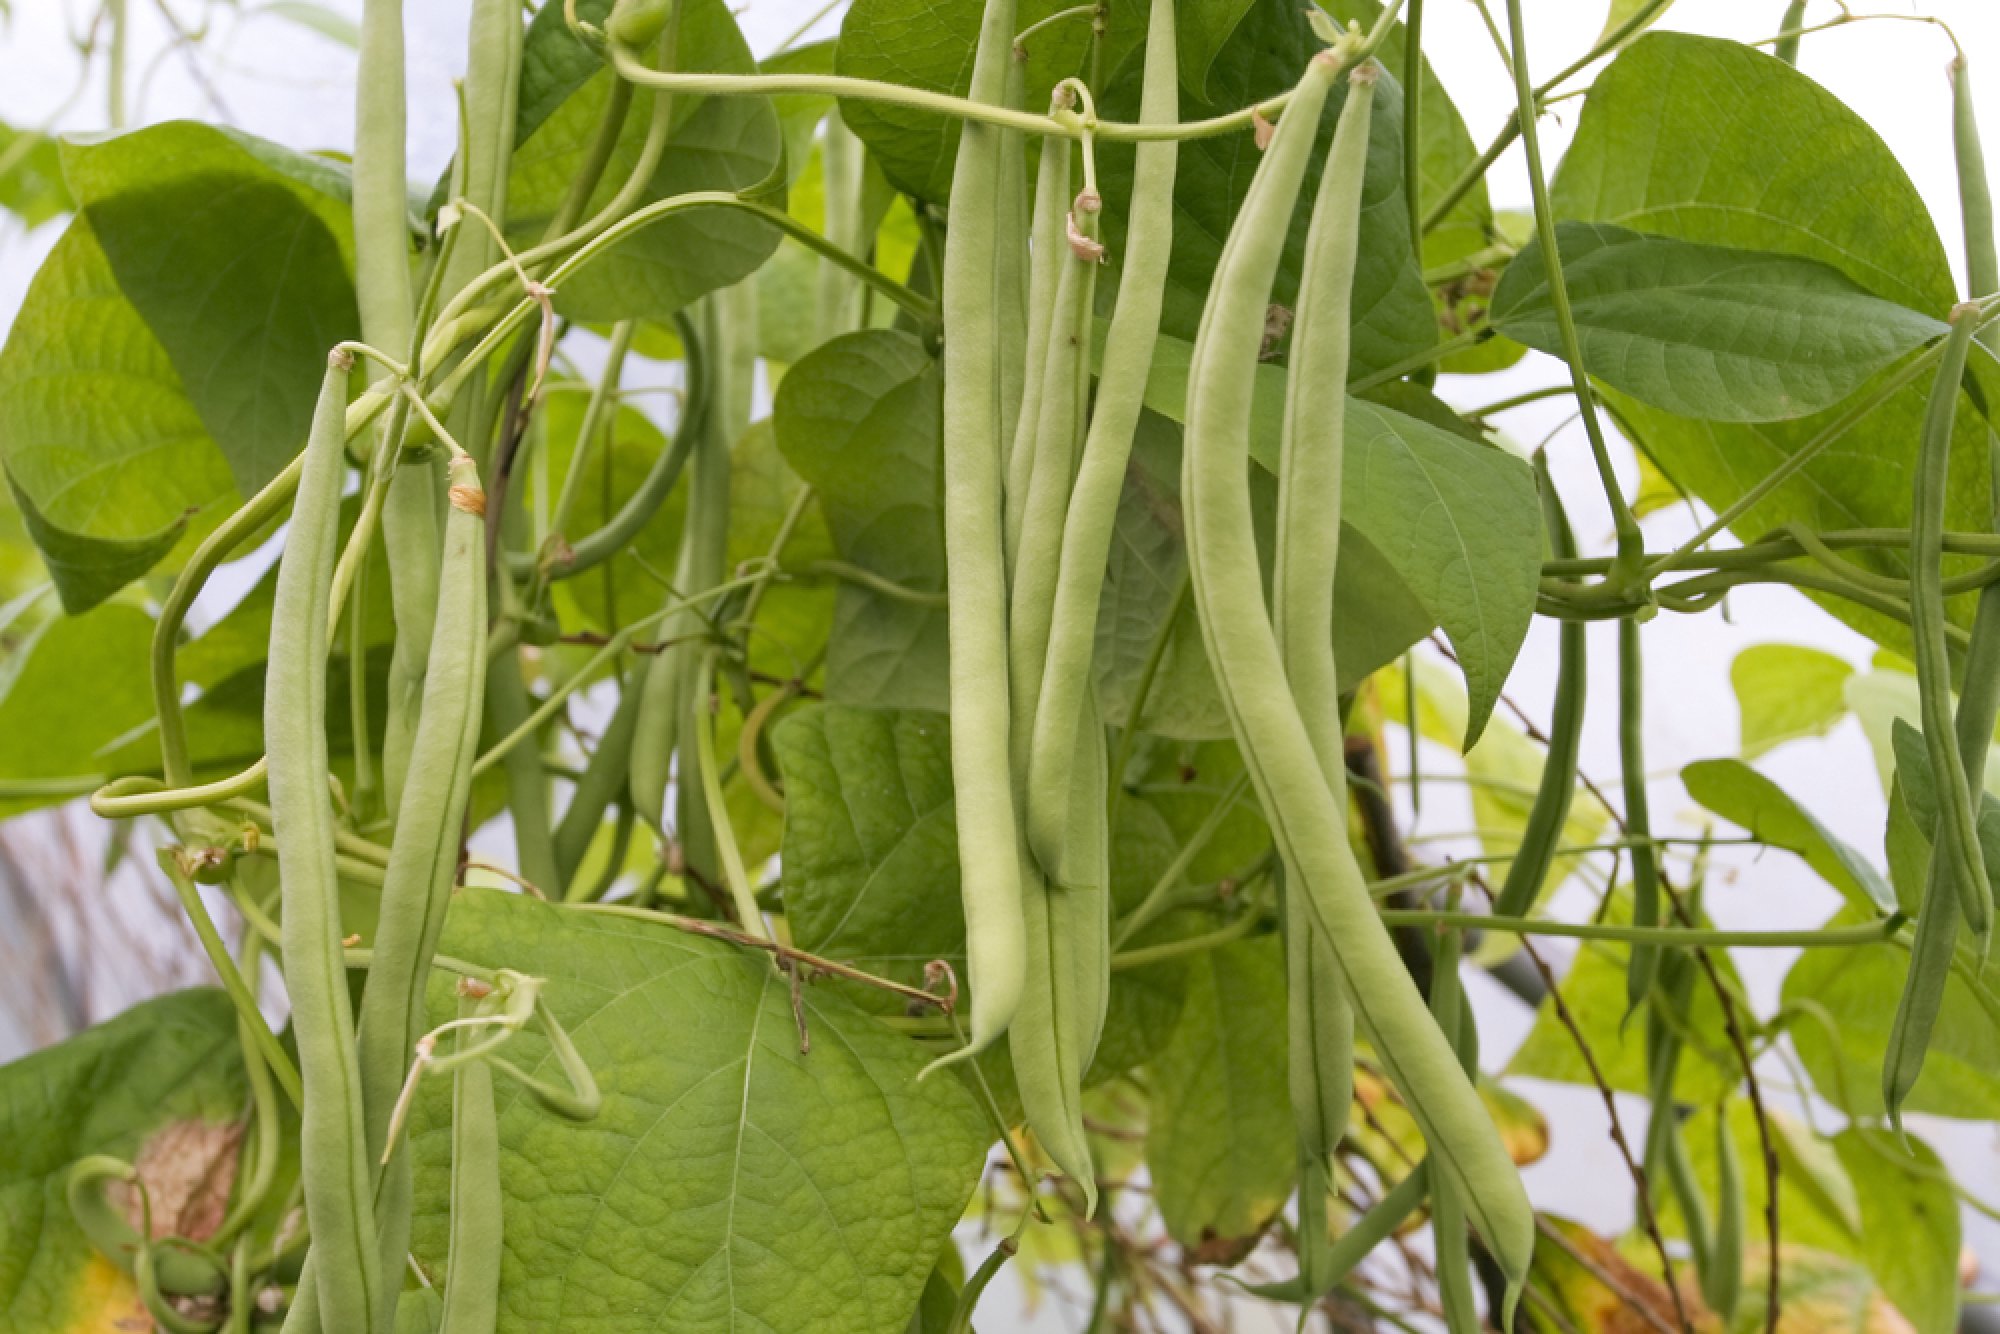 Green beans on the plant.